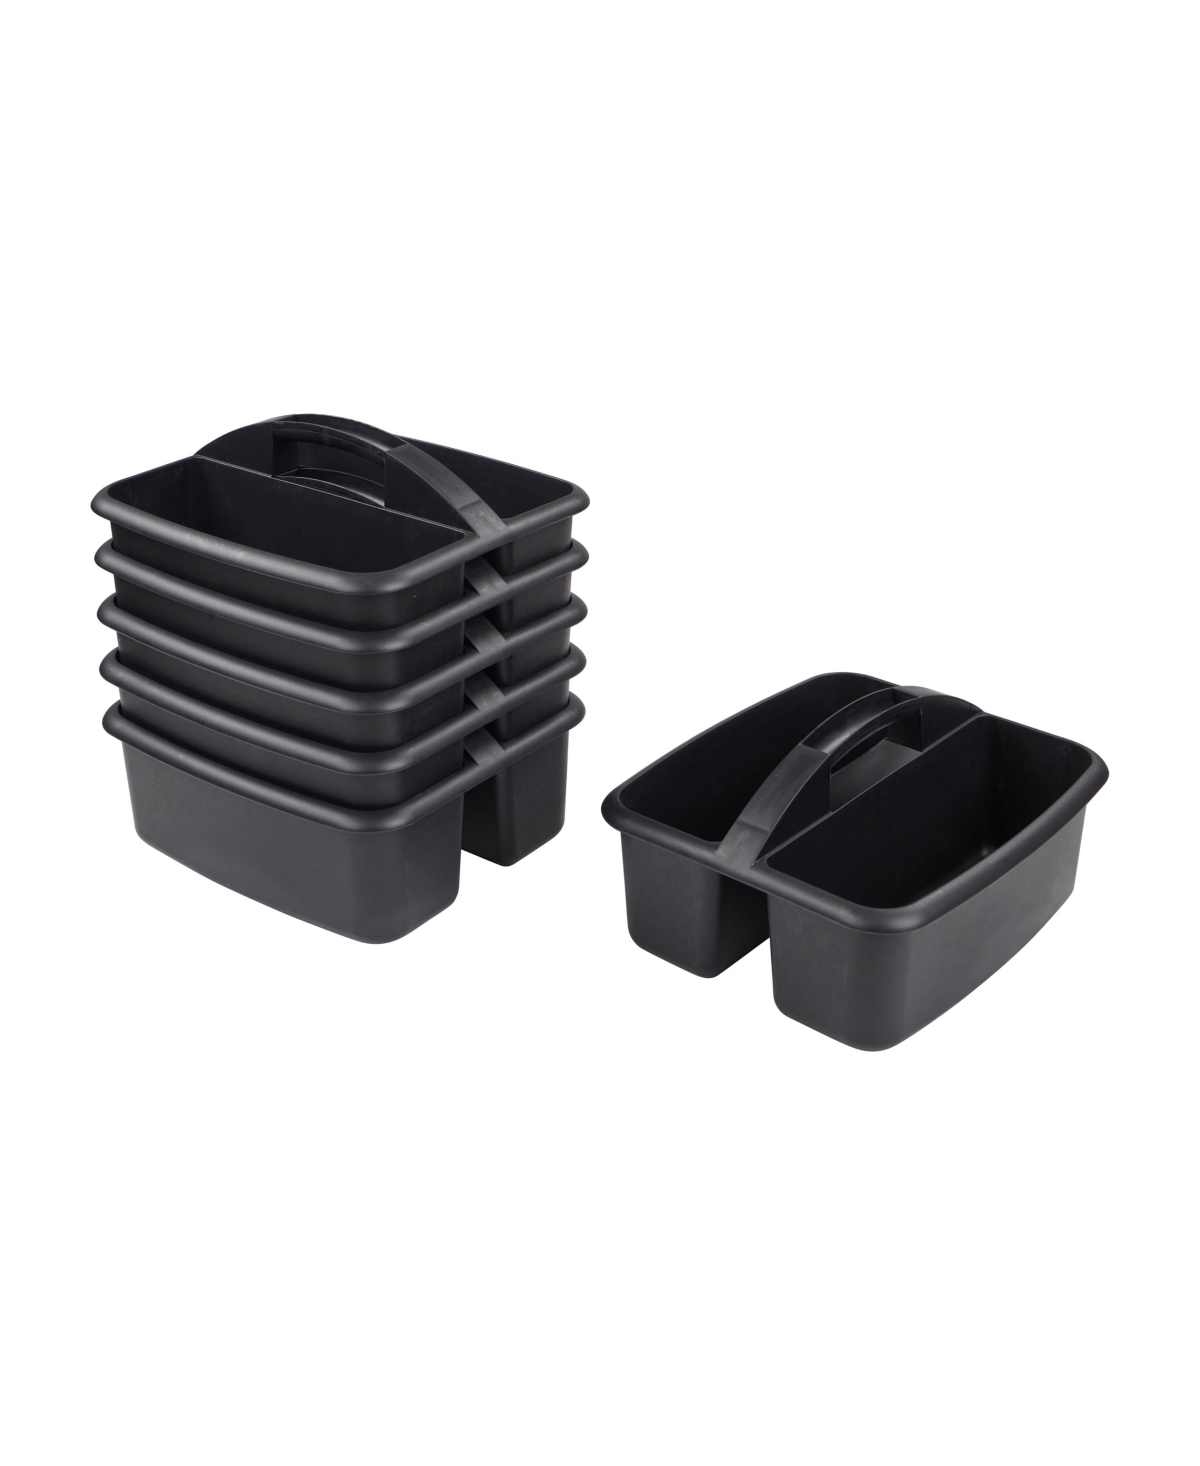 2-Compartment Storage Caddy, Black, 6-Pack - Grey